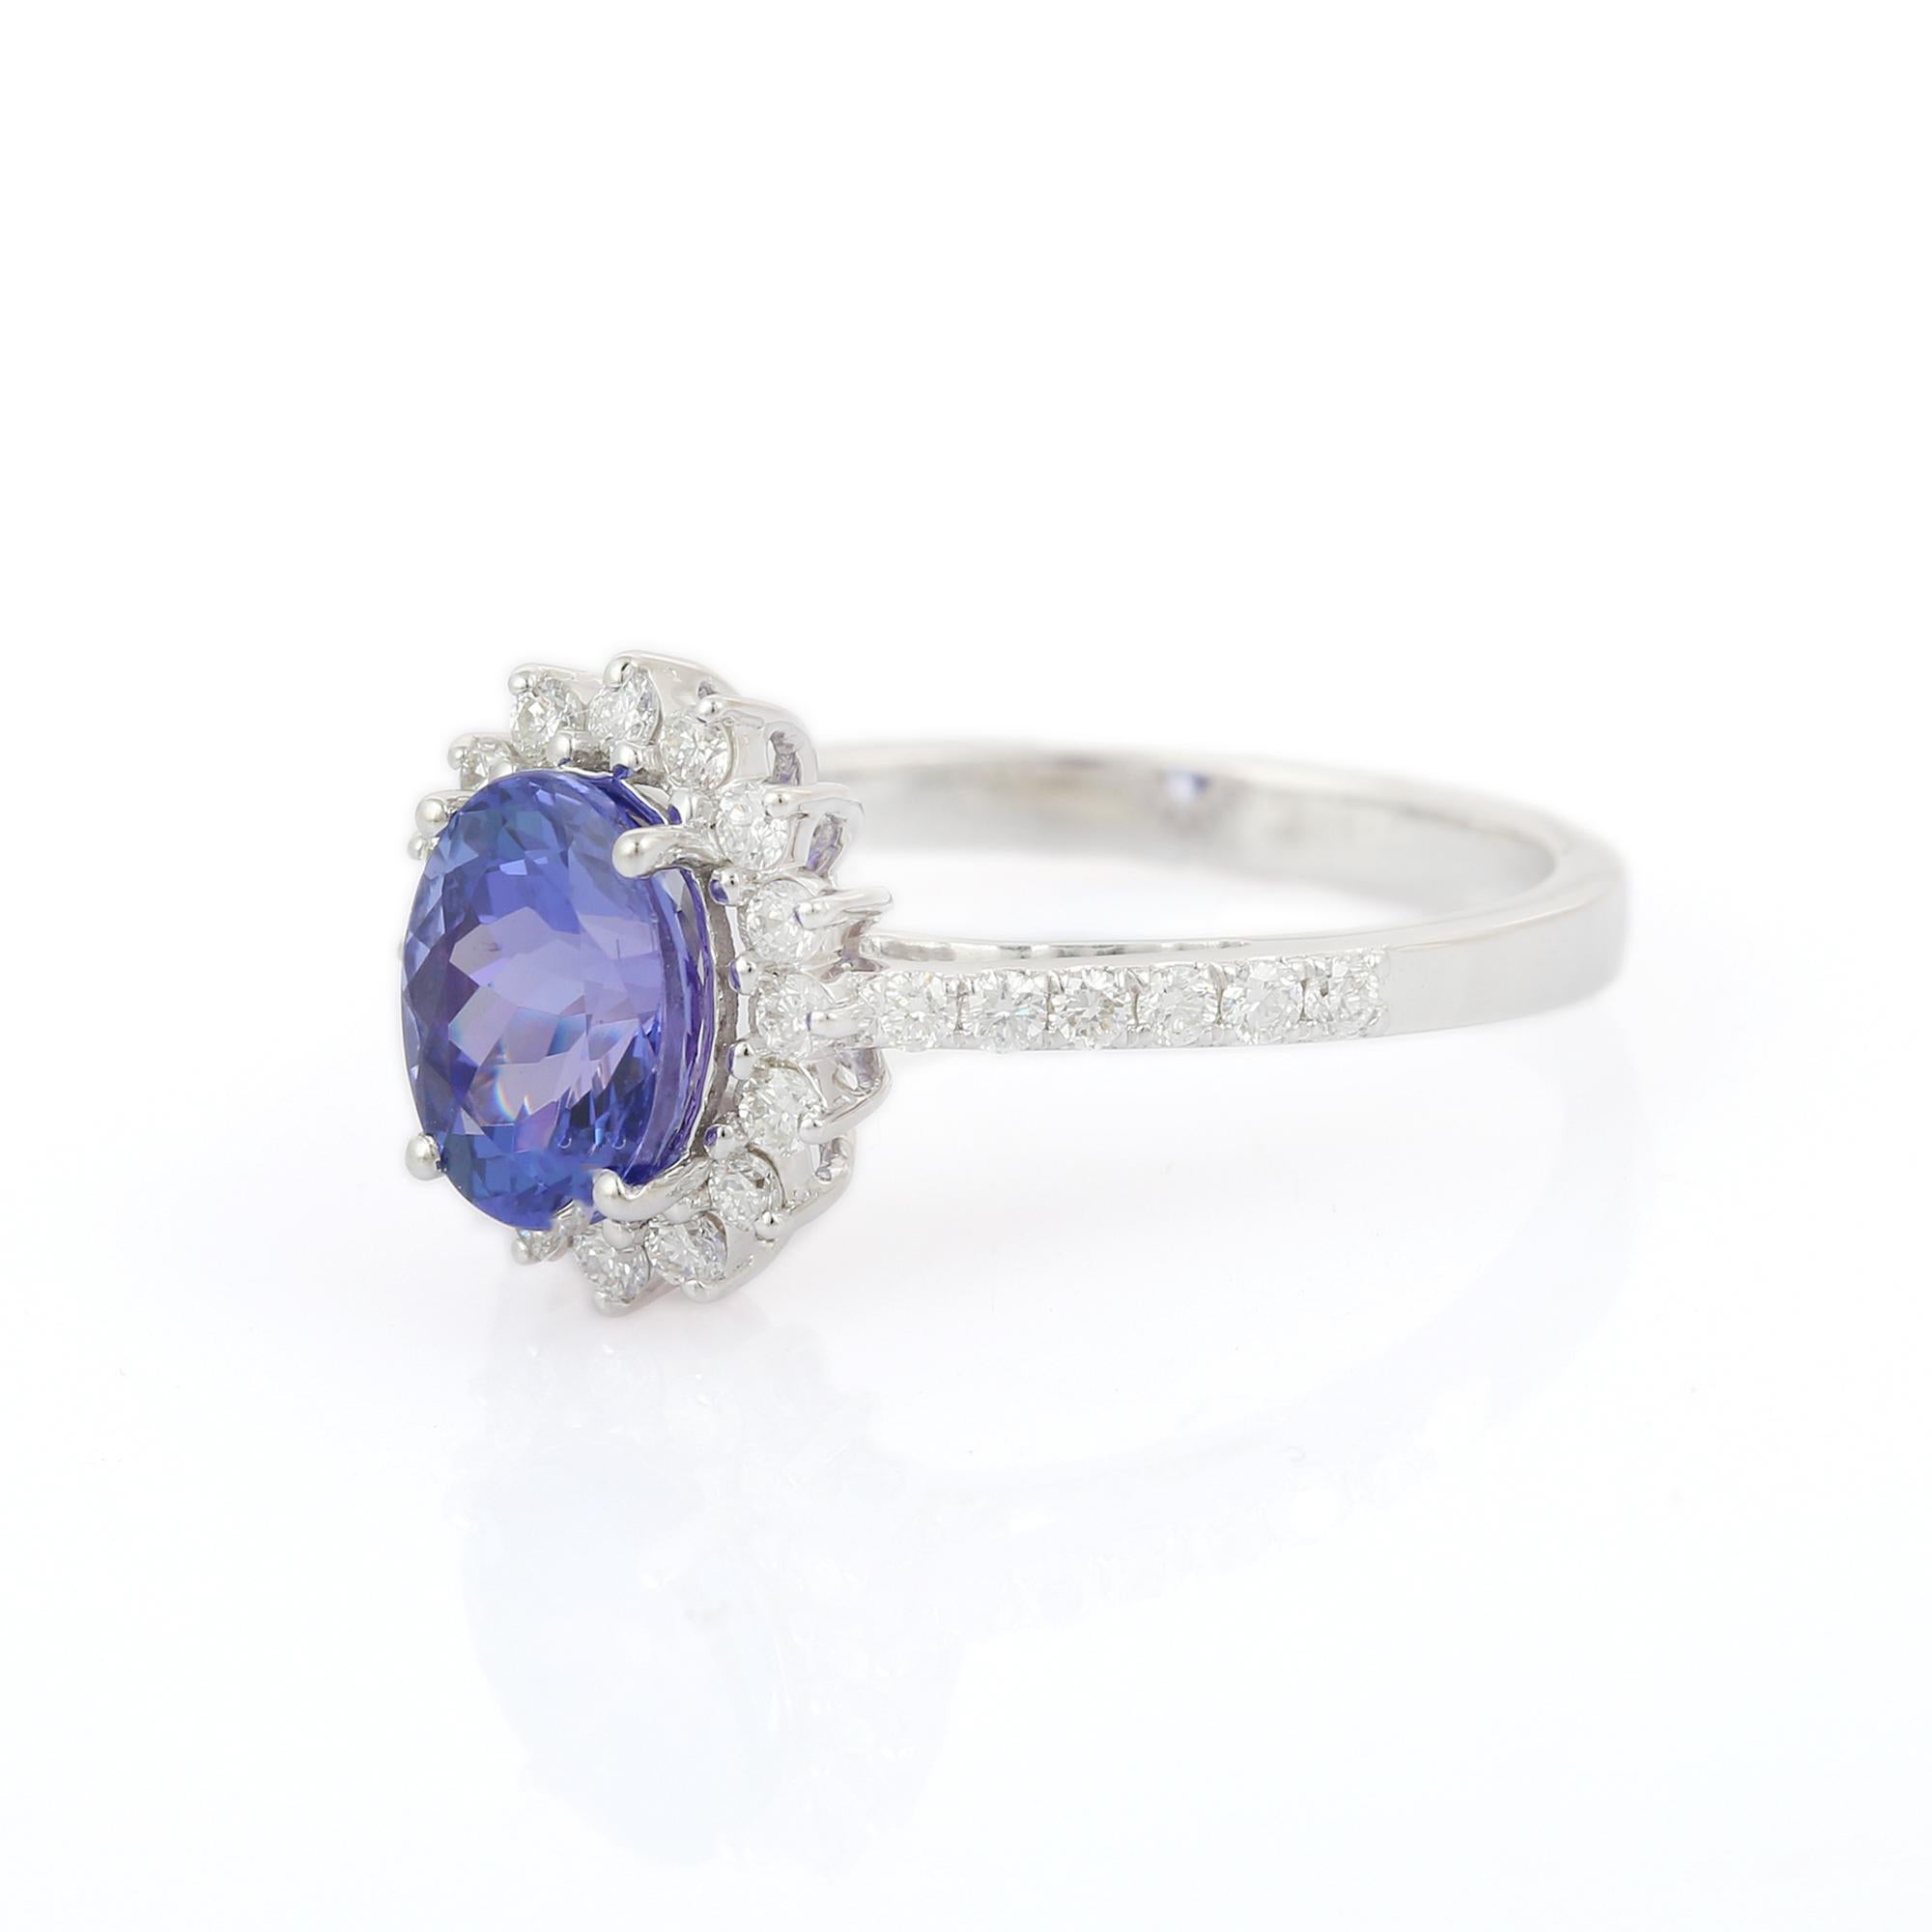 For Sale:  1.59 Carat Natural Tanzanite and Diamond Ring in 18k Solid White Gold 2